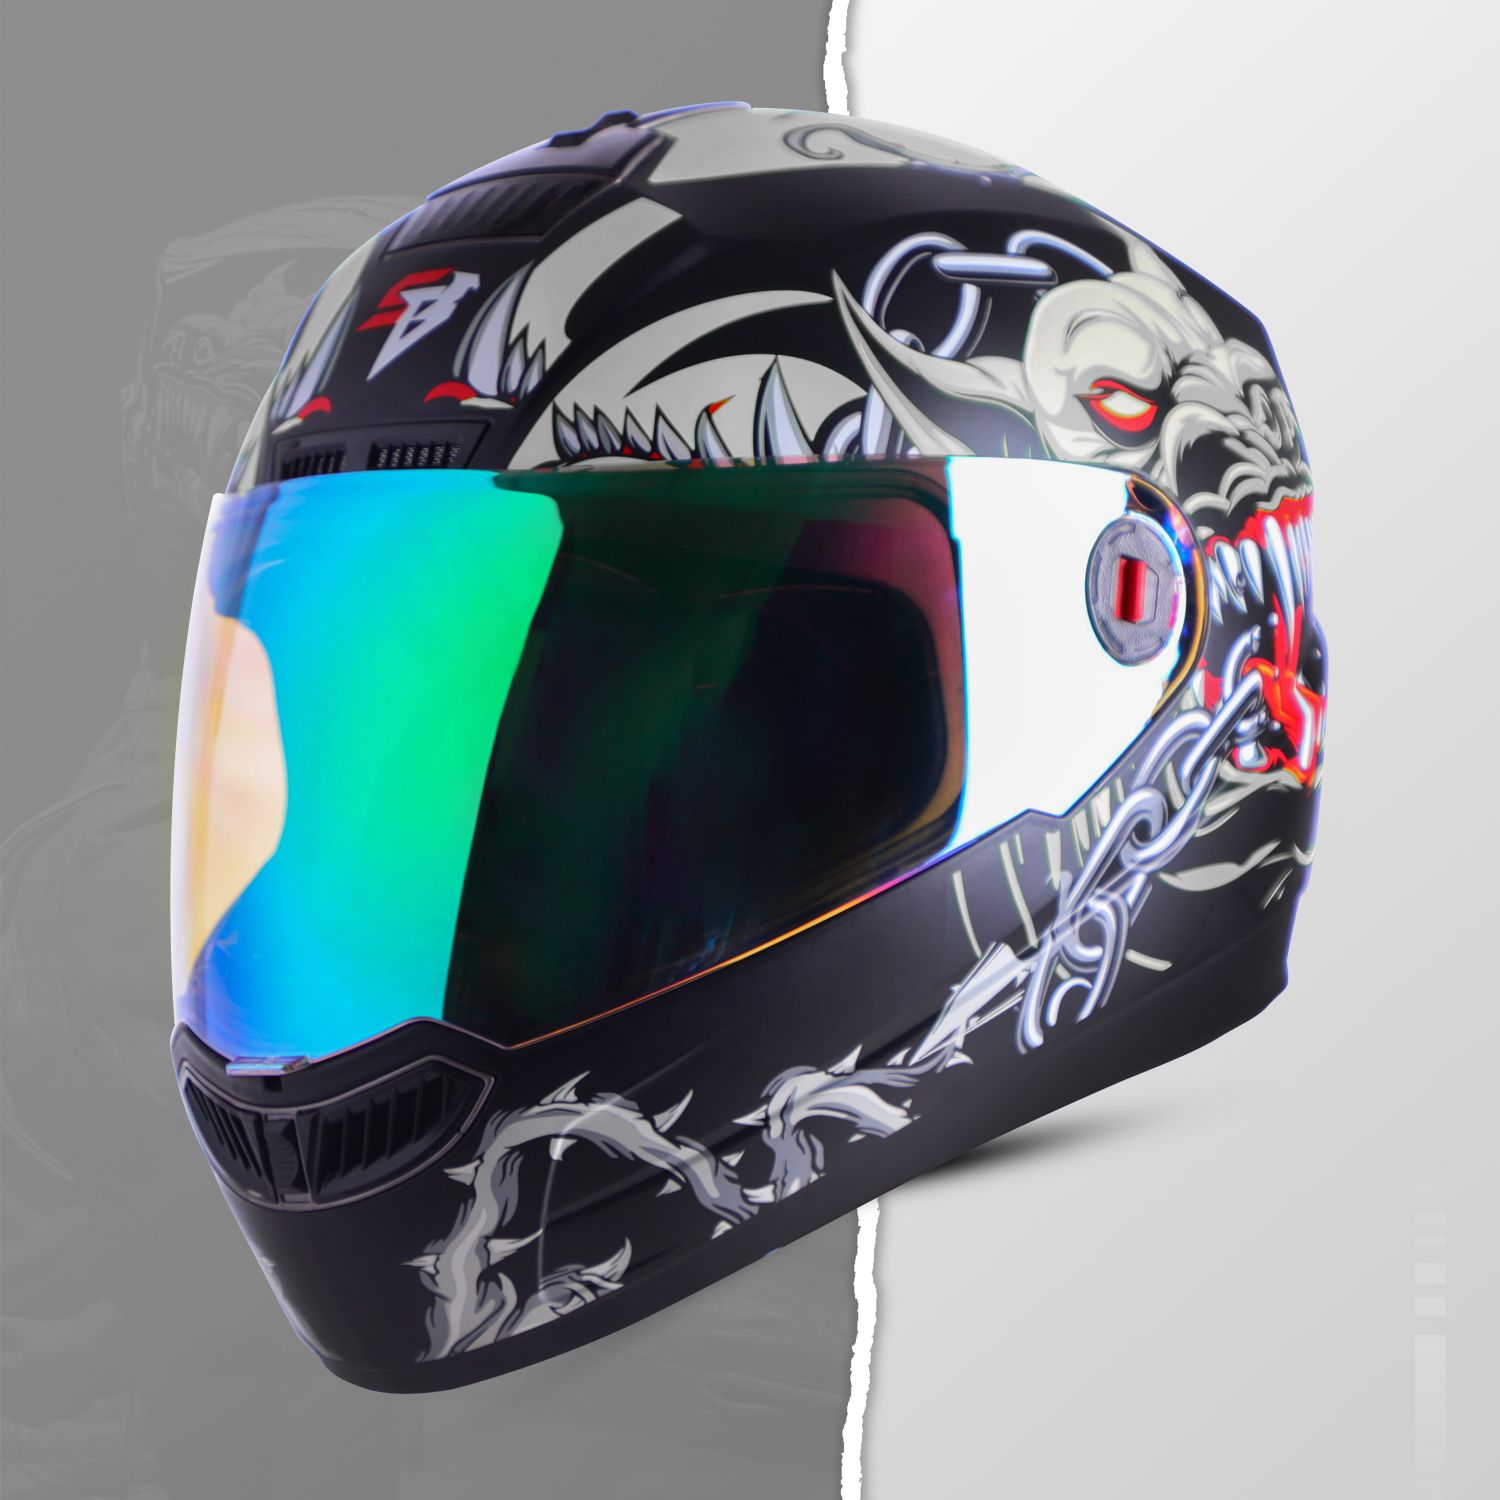 Steelbird SBA-1 Angry Dog ISI Certified Full Face Graphic Helmet For Men And Women (Glossy Black Grey With Night Vision Green Visor)